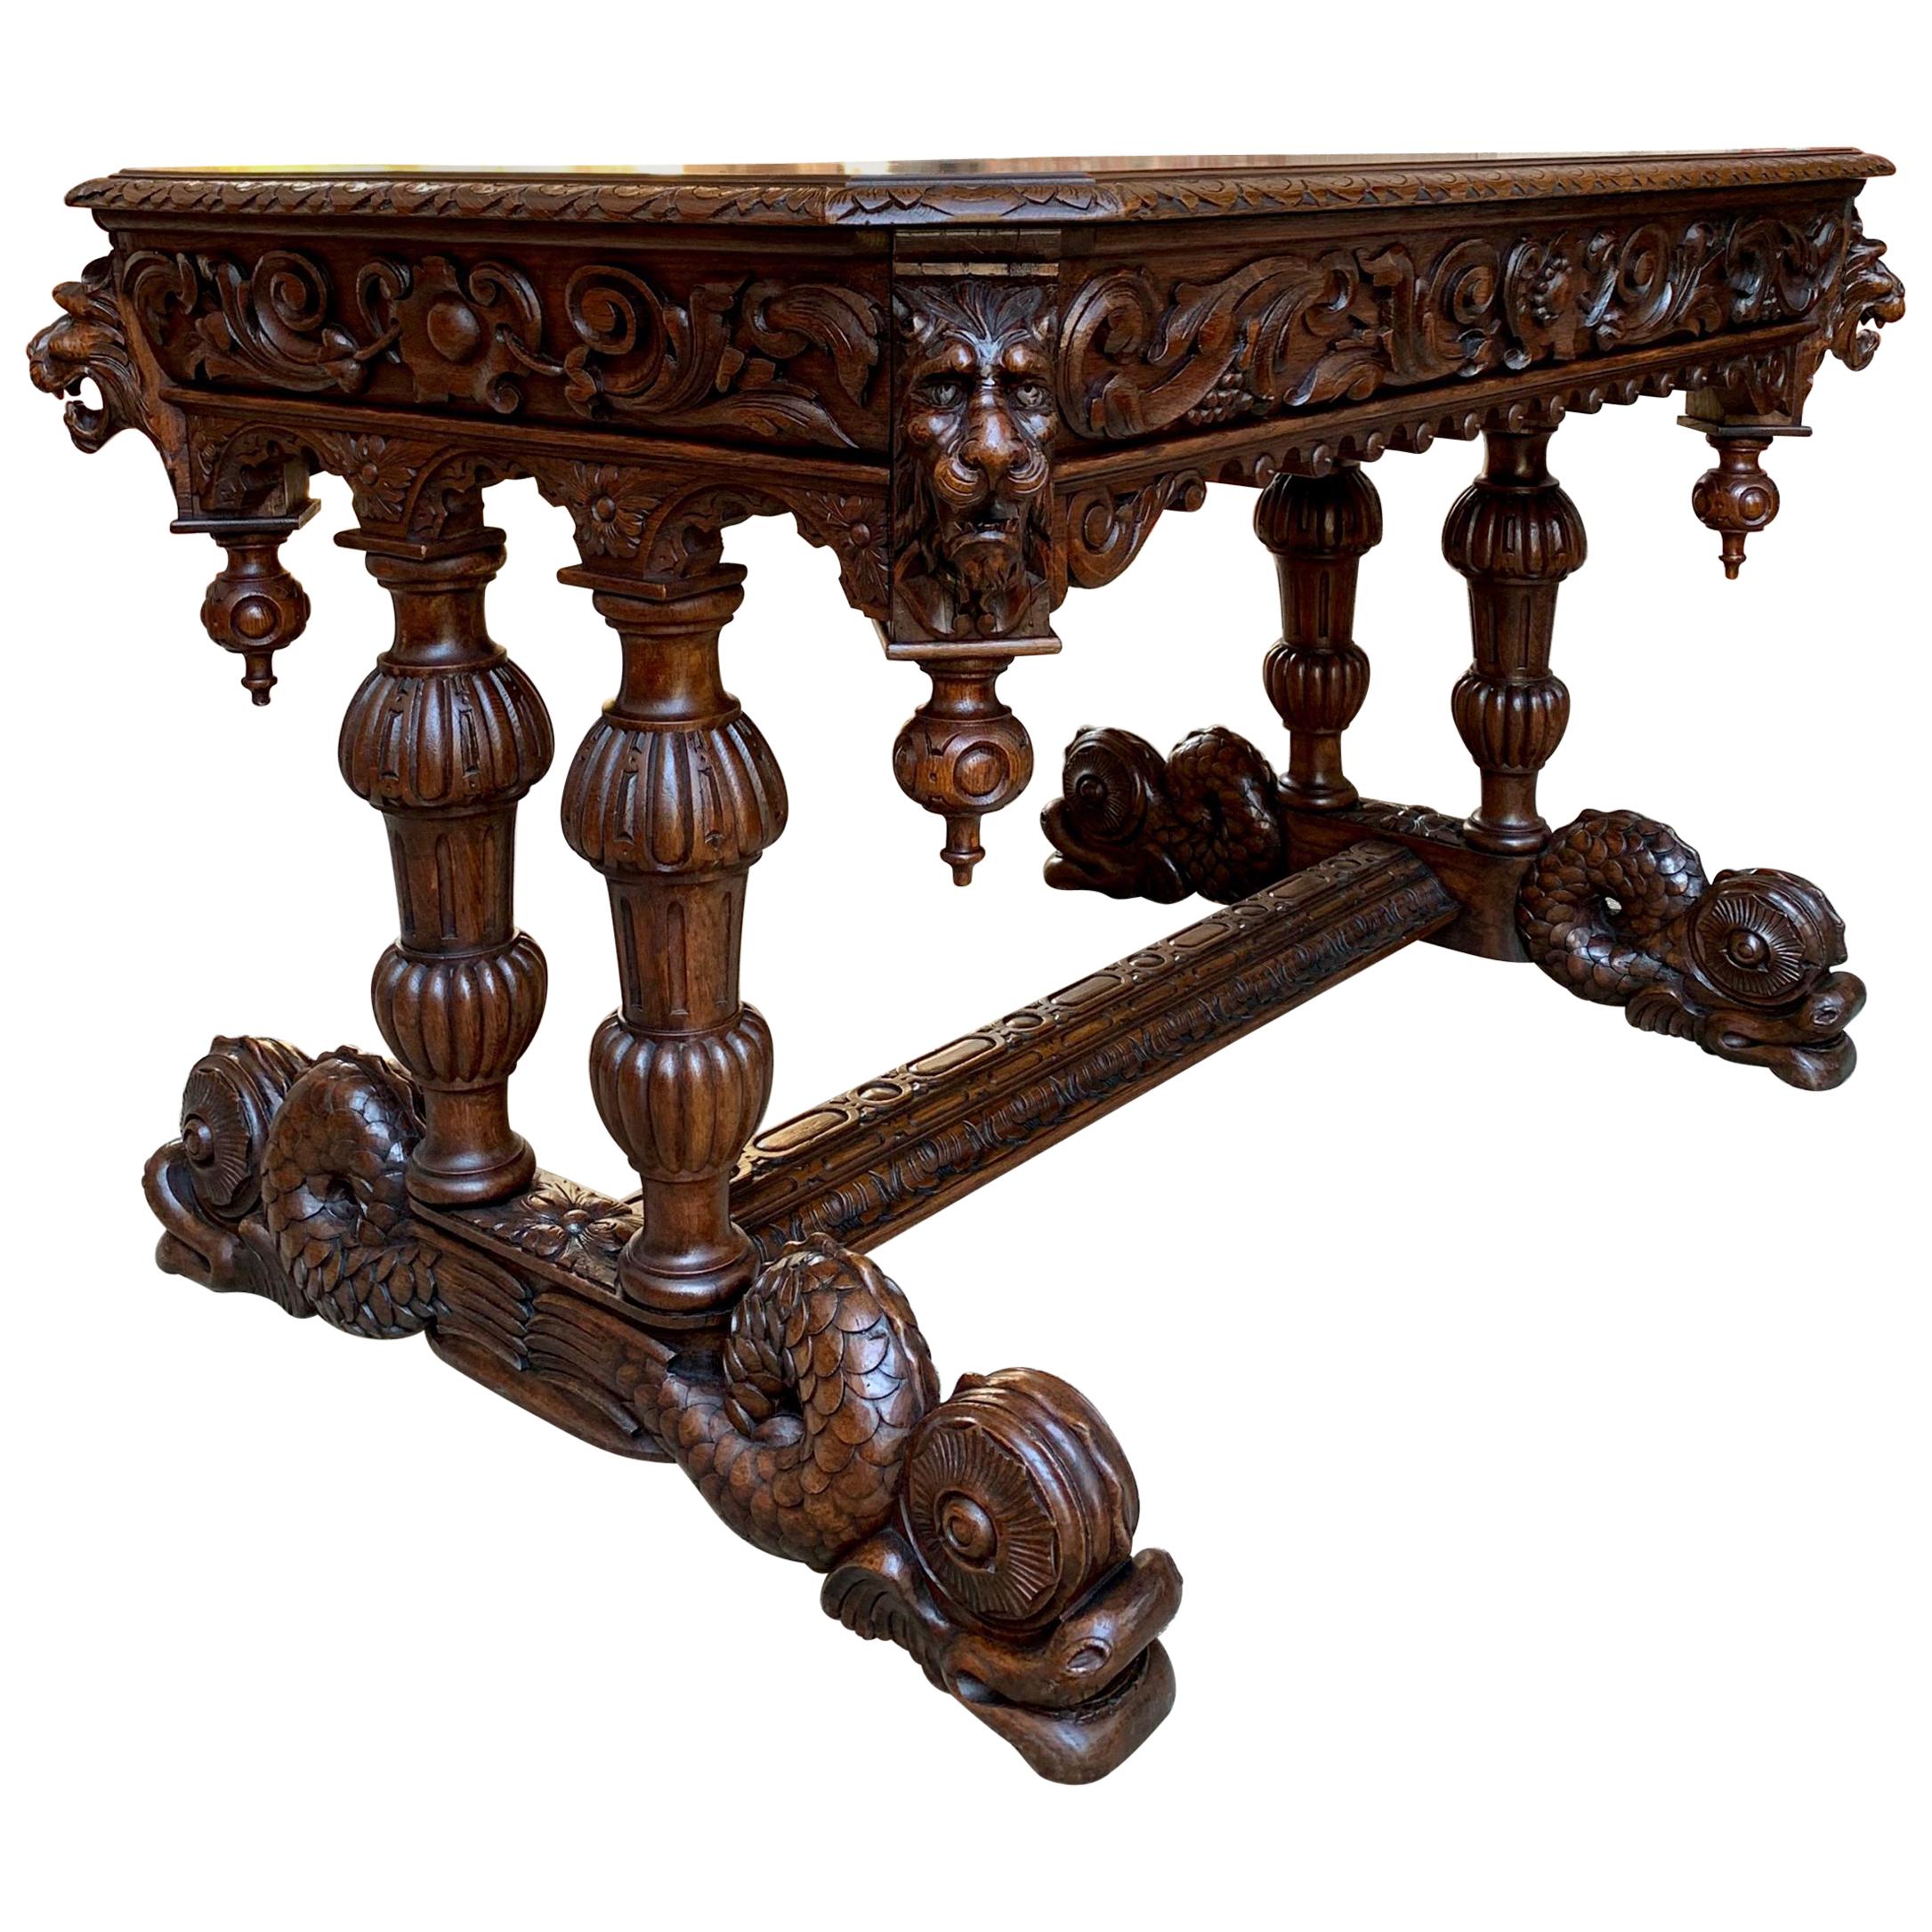 19th century French Carved Oak Desk Sofa Side Table Dolphin Renaissance Gothic